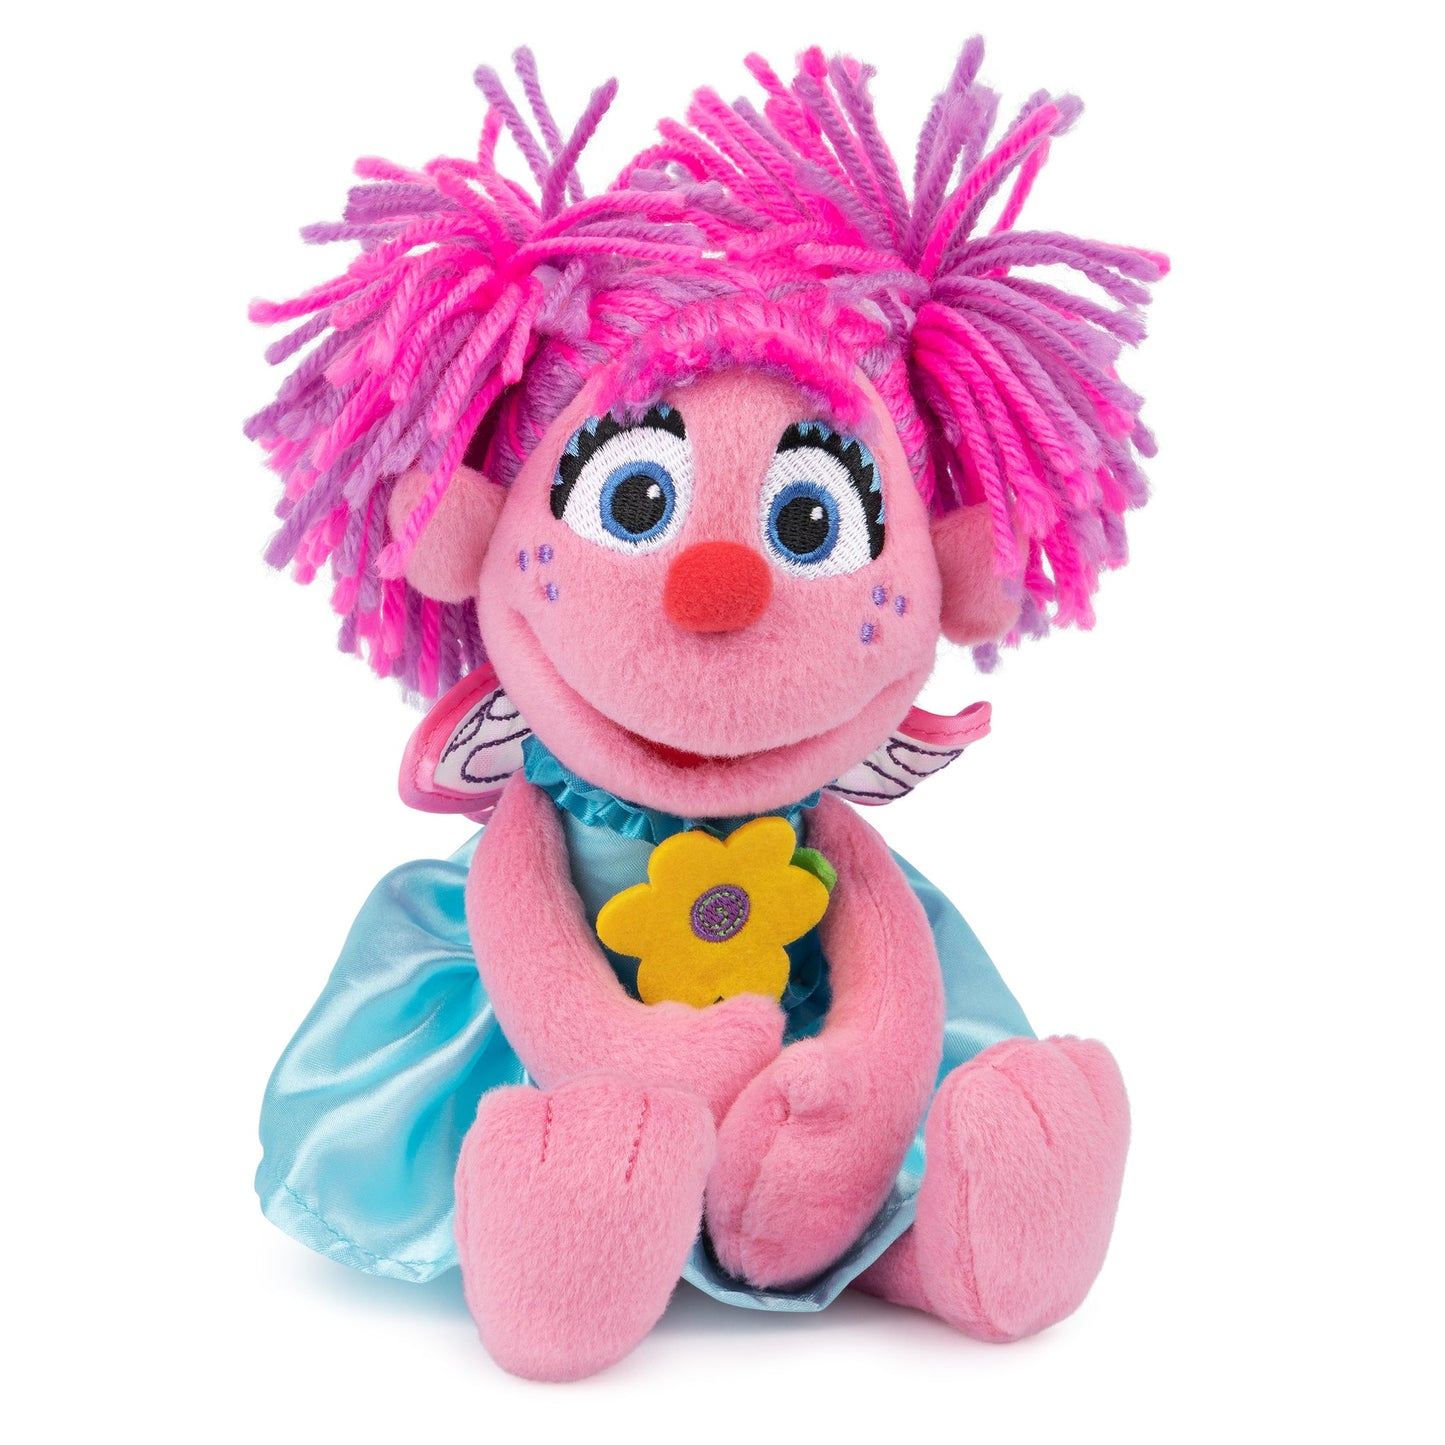 ABBY CADABBY WITH FLOWERS, 11 IN